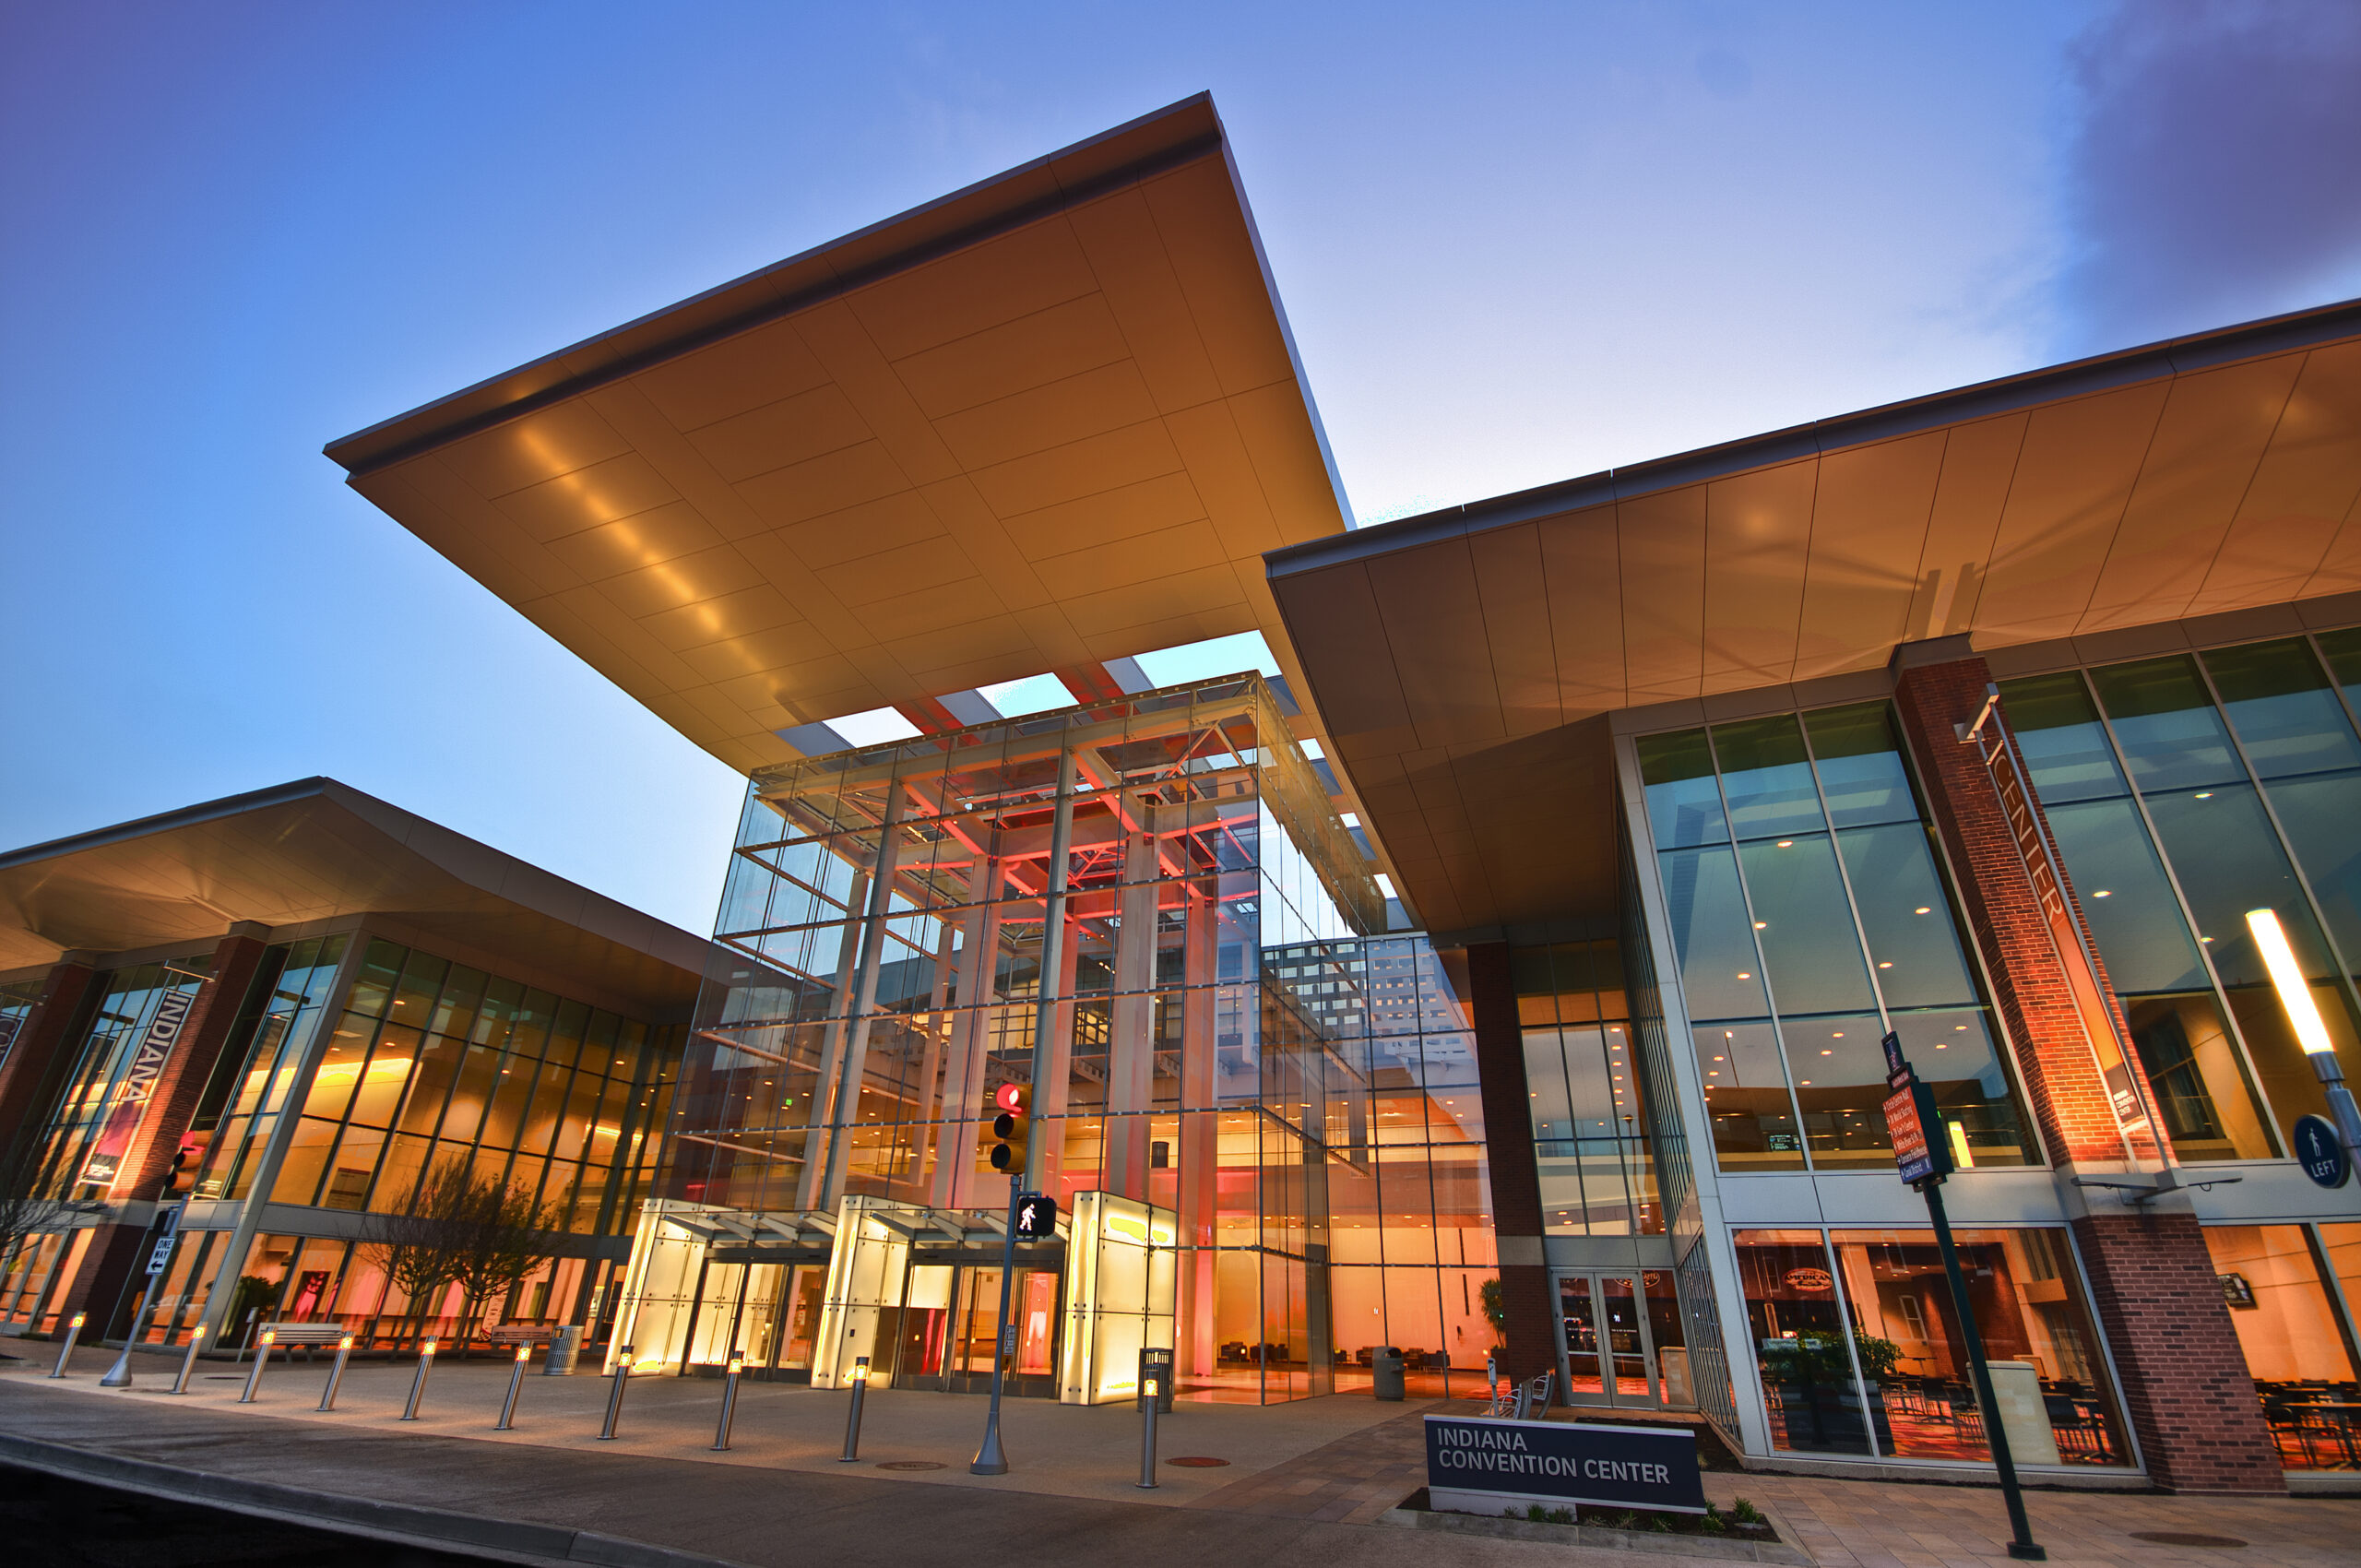 The exterior of the Indiana Convention Center lit up orange